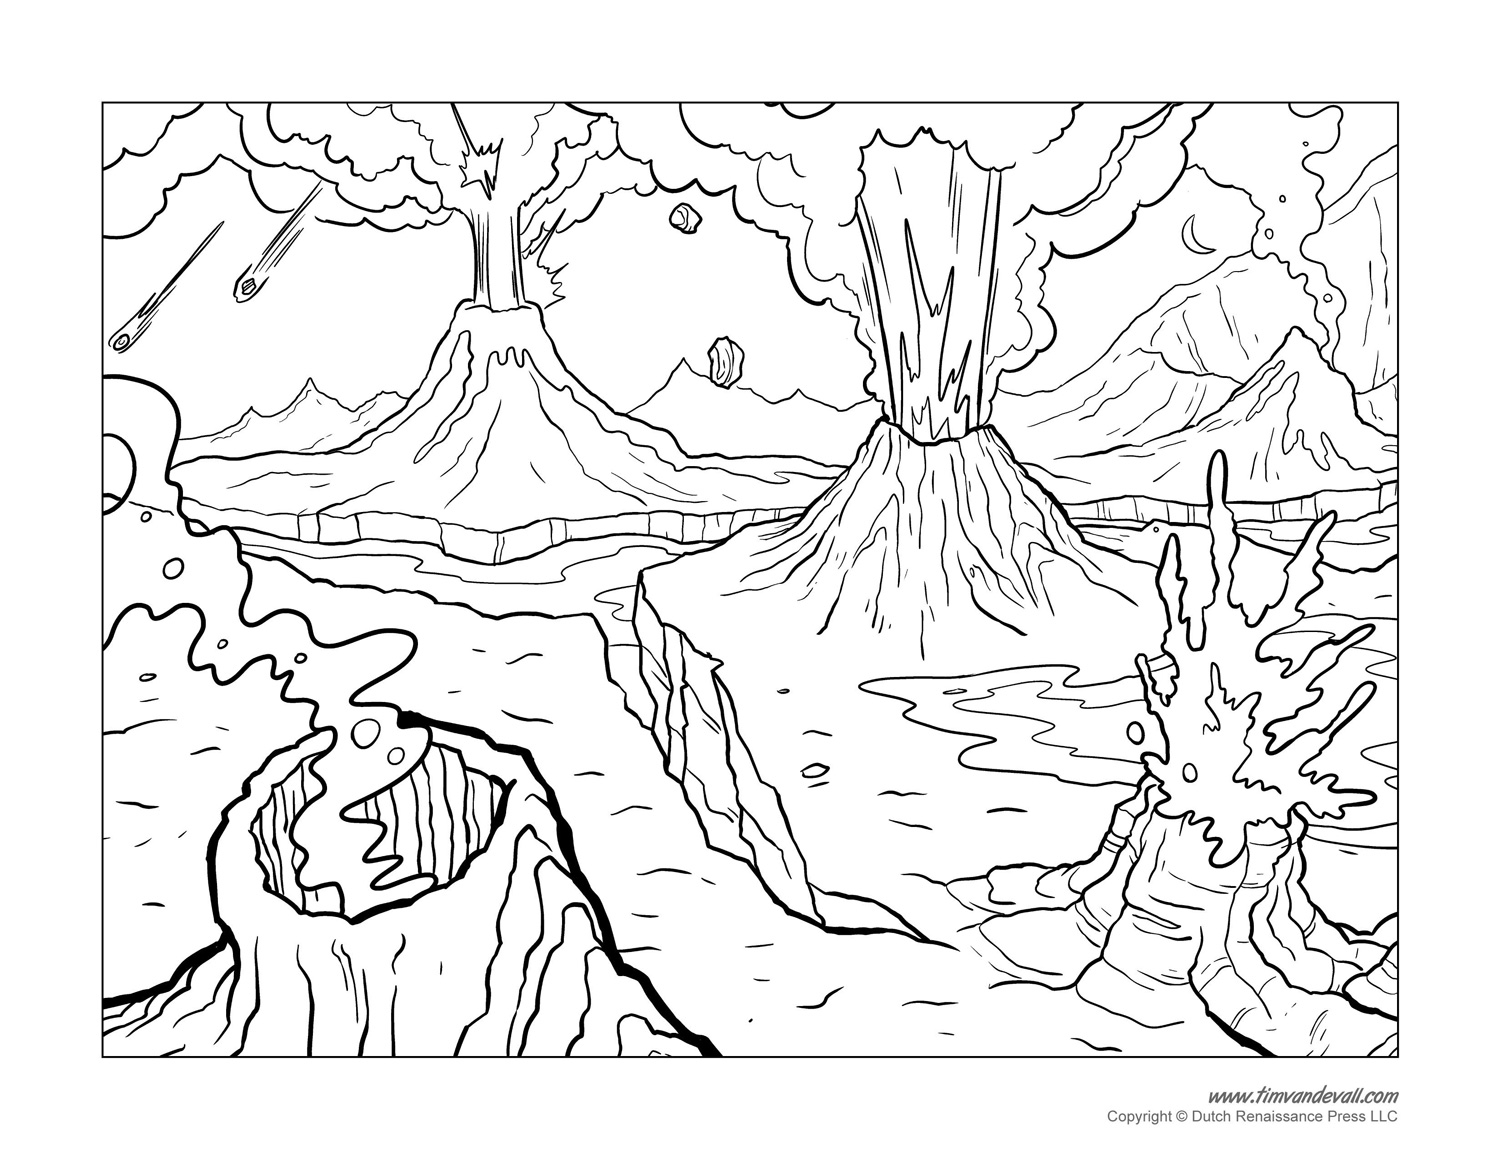 Volcano coloring pages â tims printables